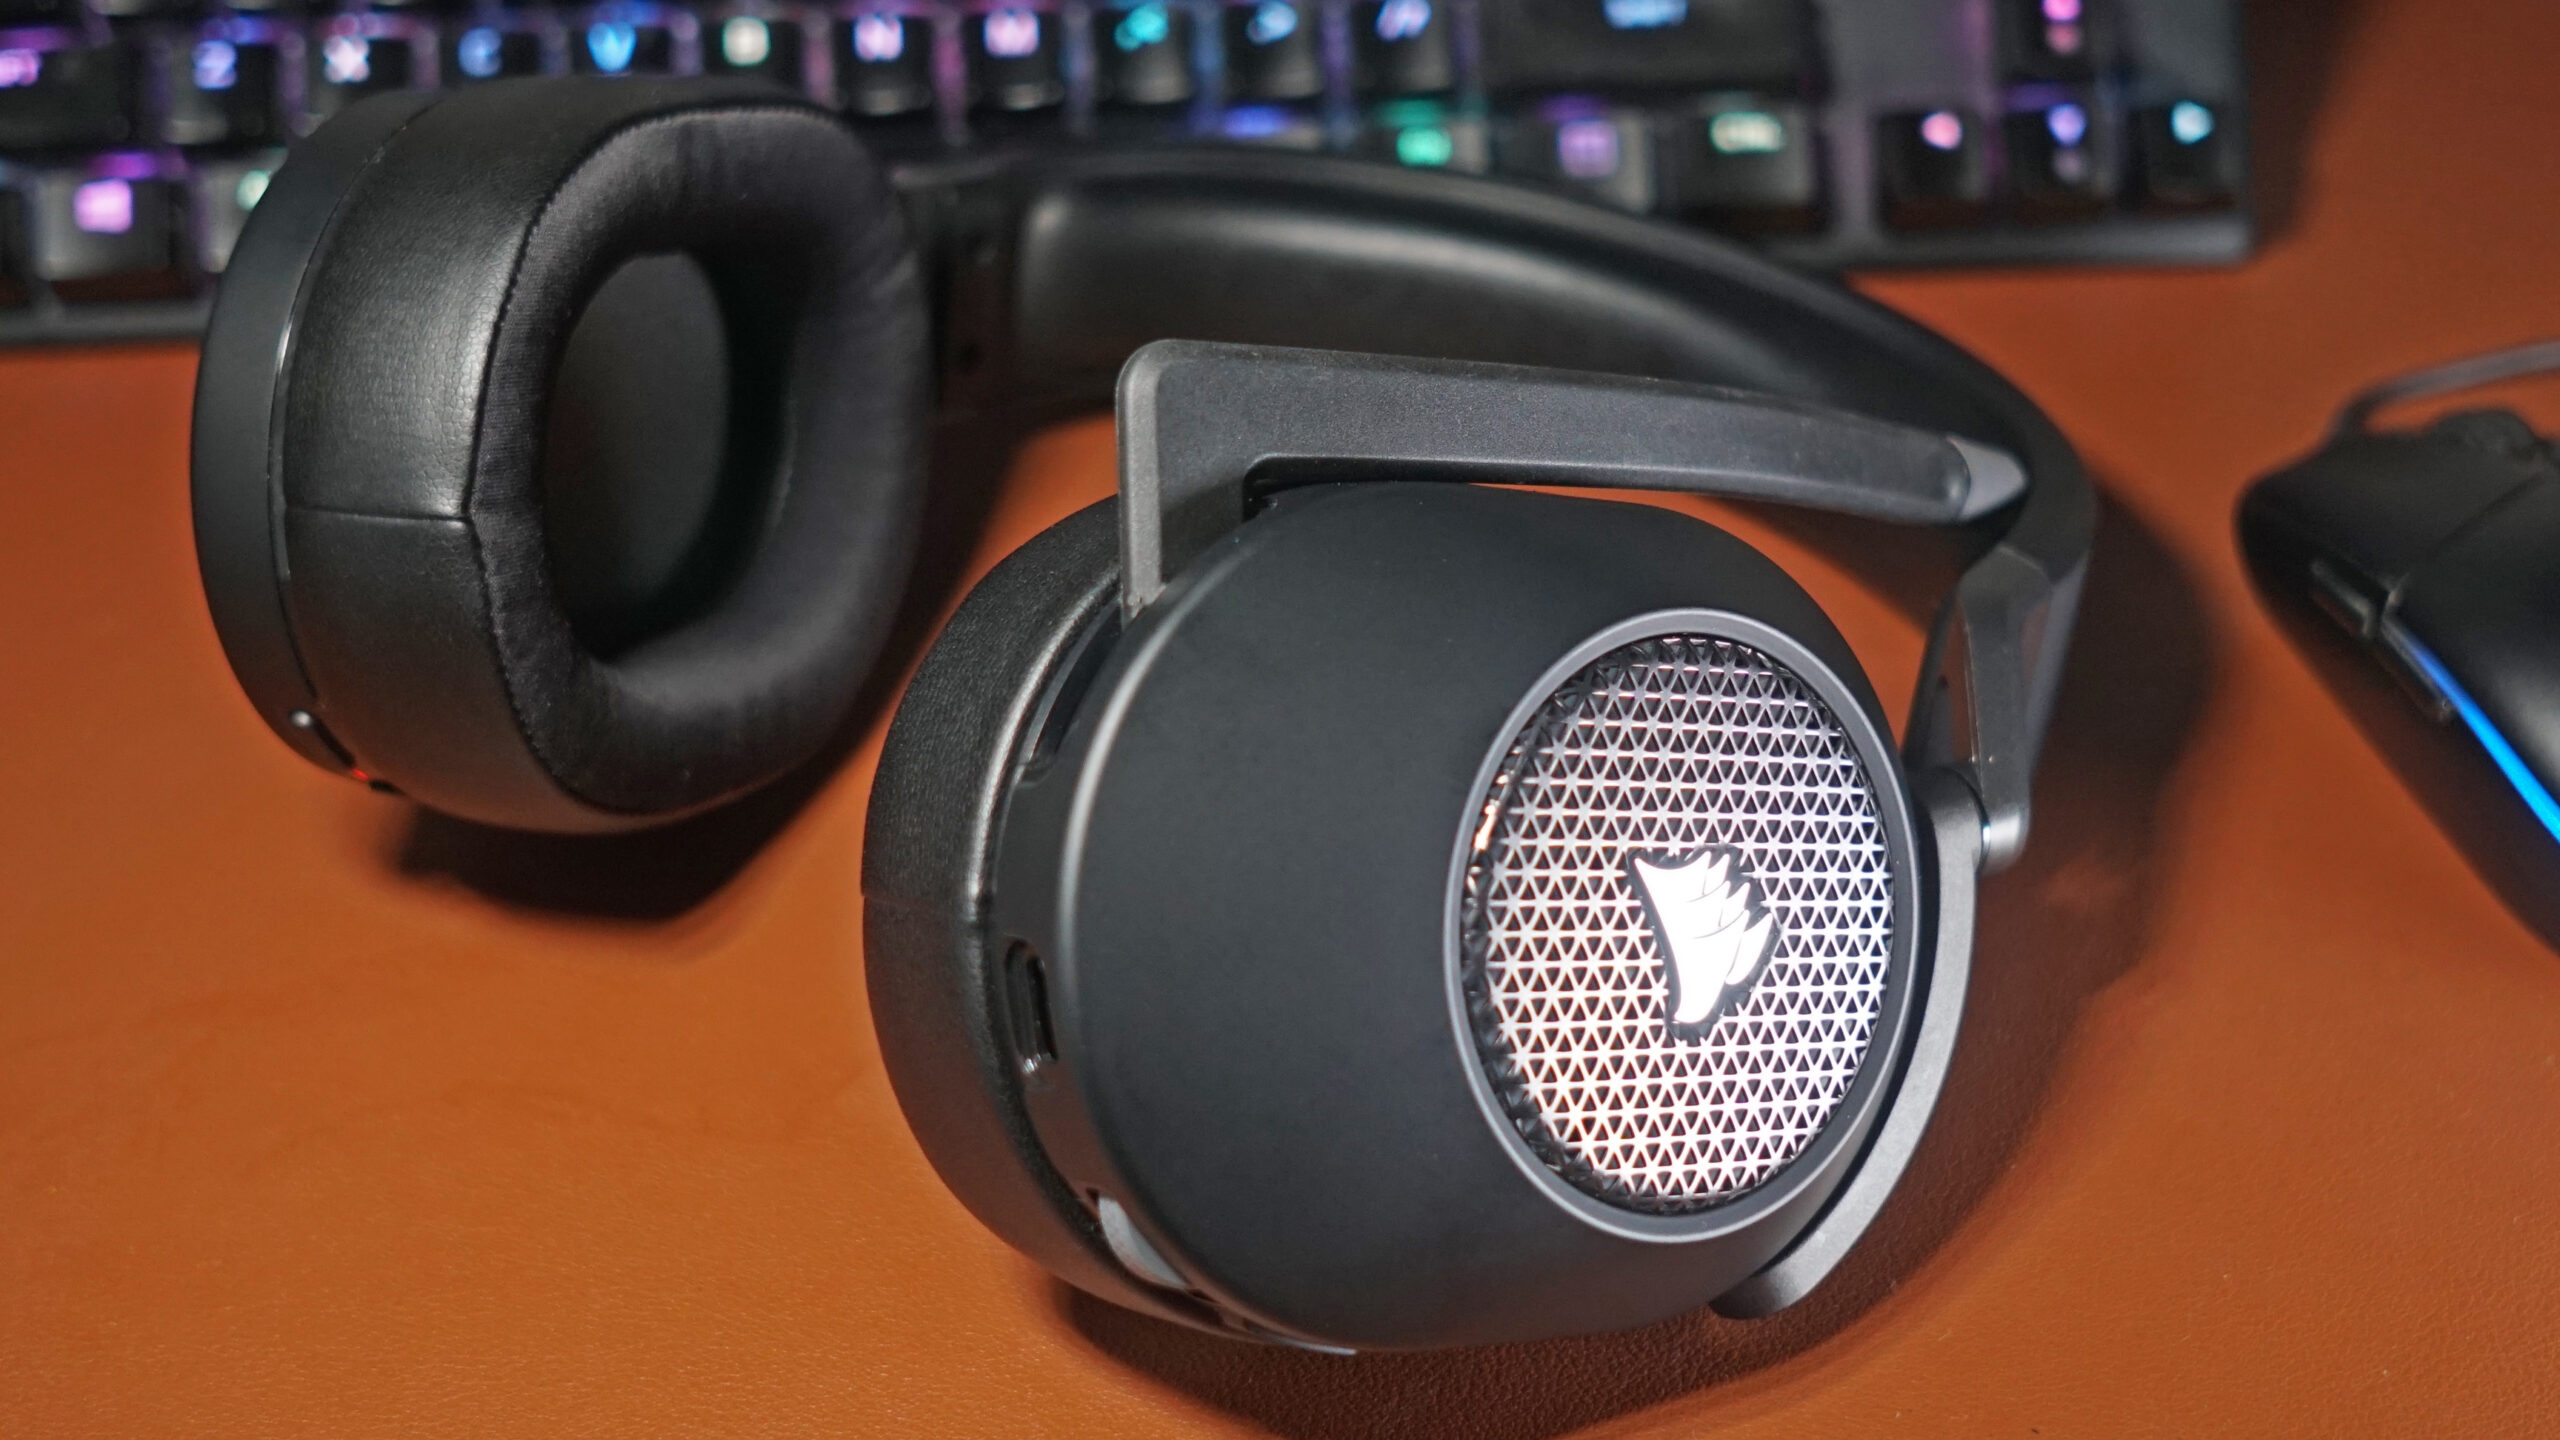 The Corsair HS65 Wireless gaming headset lays on a leather surface next to a Logitech gaming mouse and in front of a HyperX mechanical gaming keyboard.